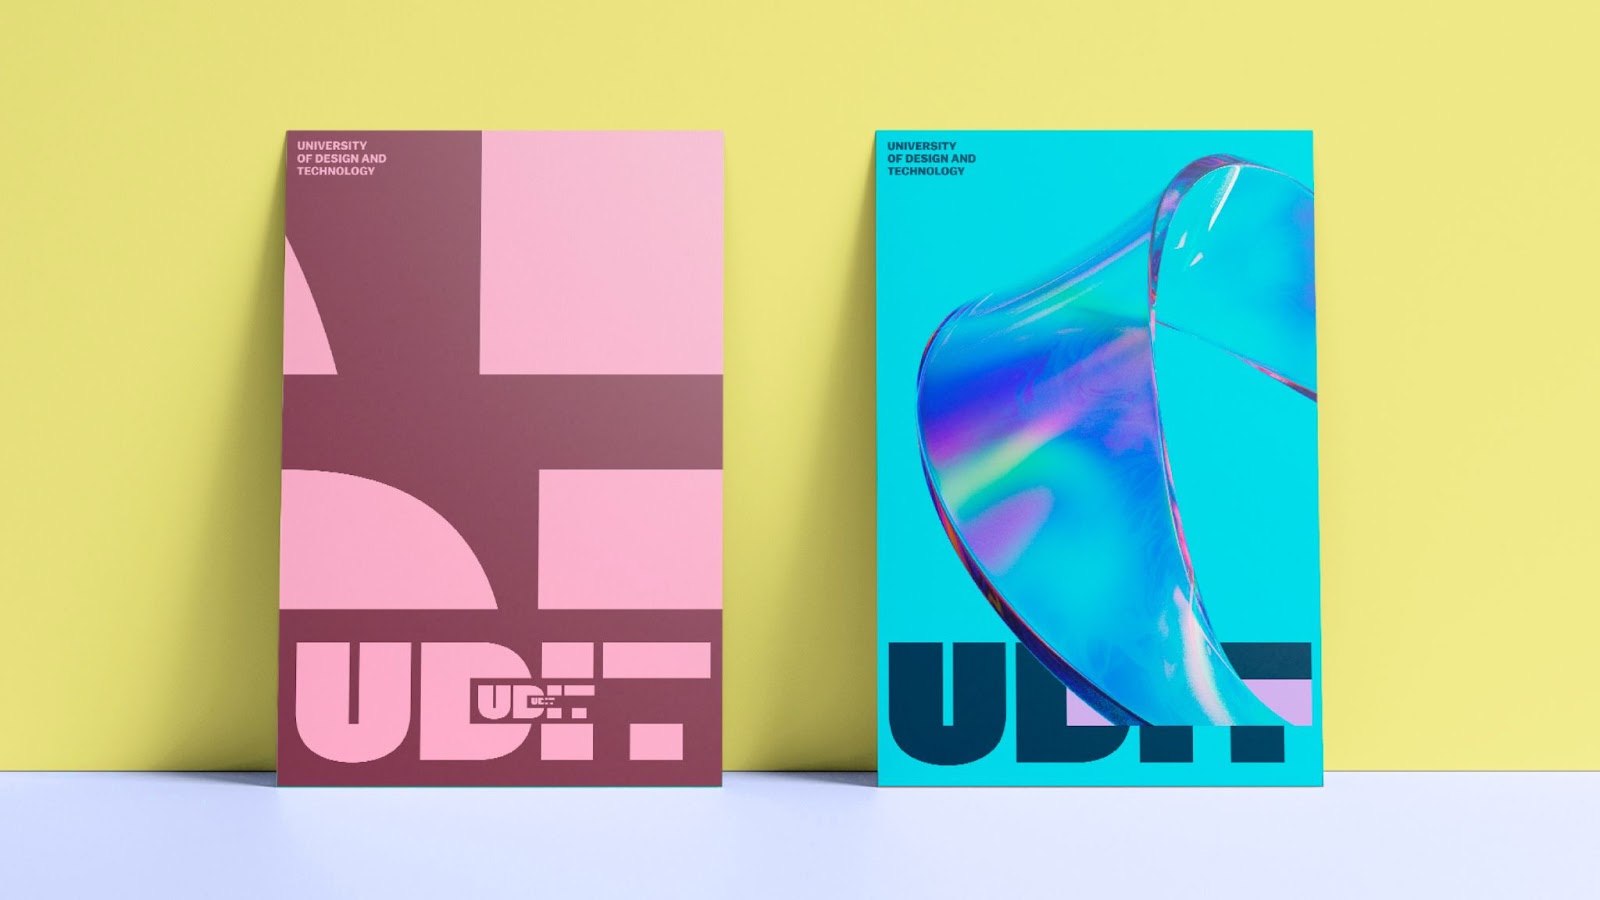 Artifact from the UDIT’s Bold and Playful Branding by Erretres article on Abduzeedo